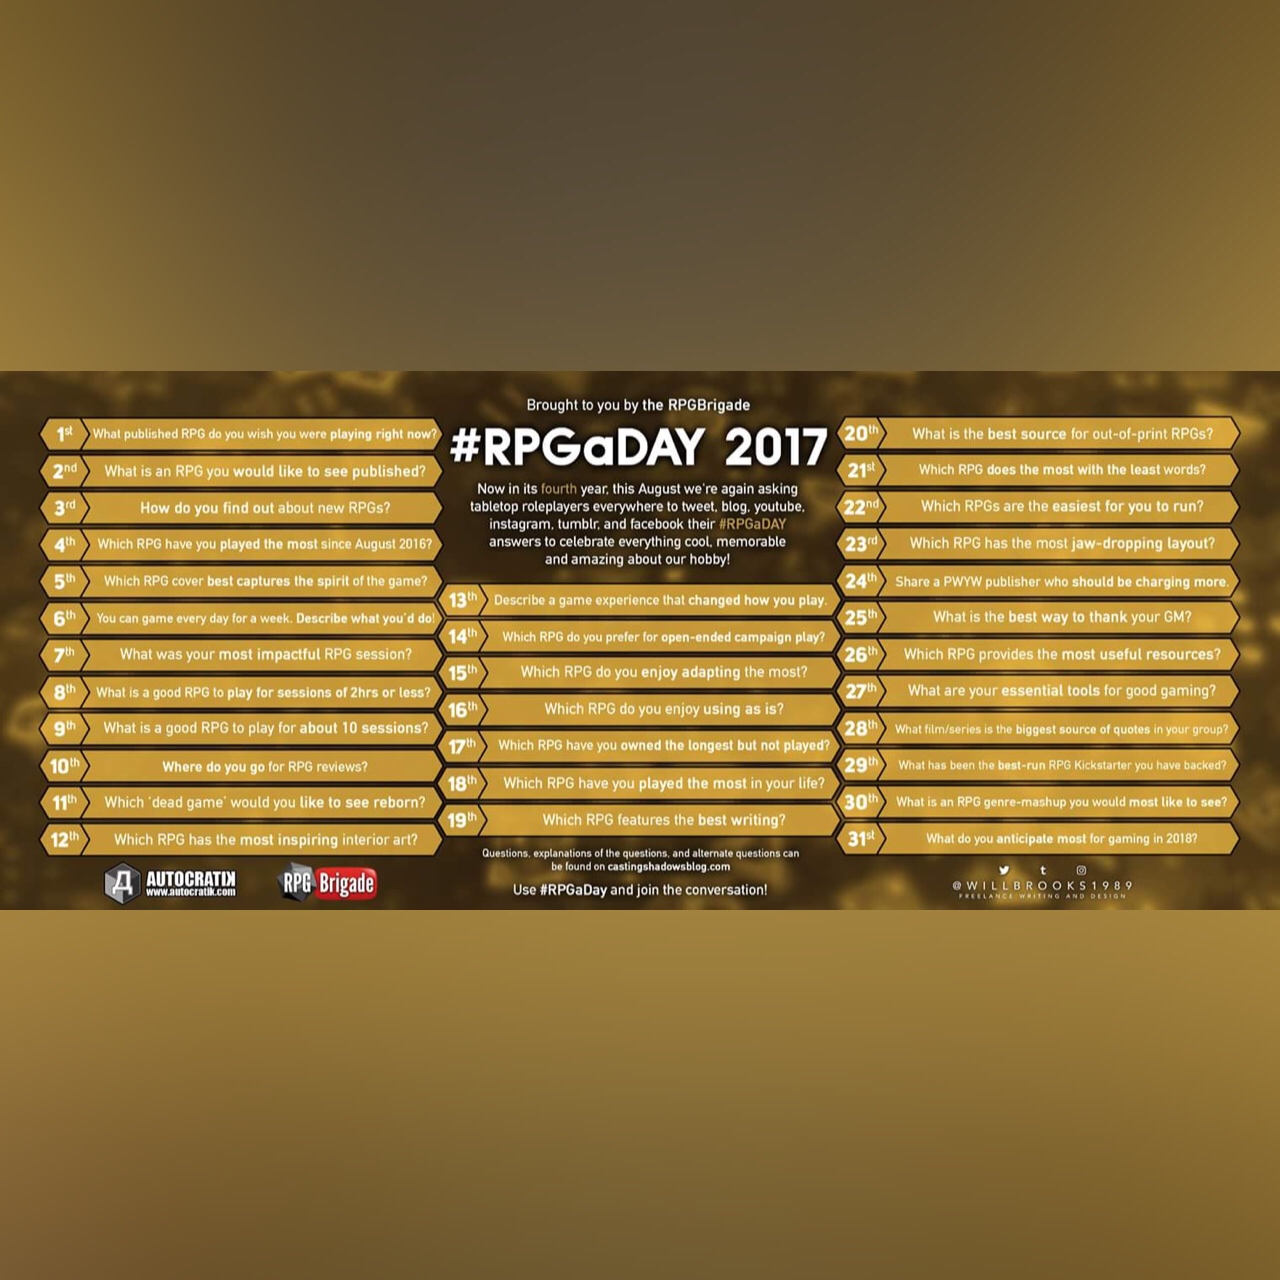 RPGaDAY 2017 August 17th Which RPG have you owned the longest but not played?